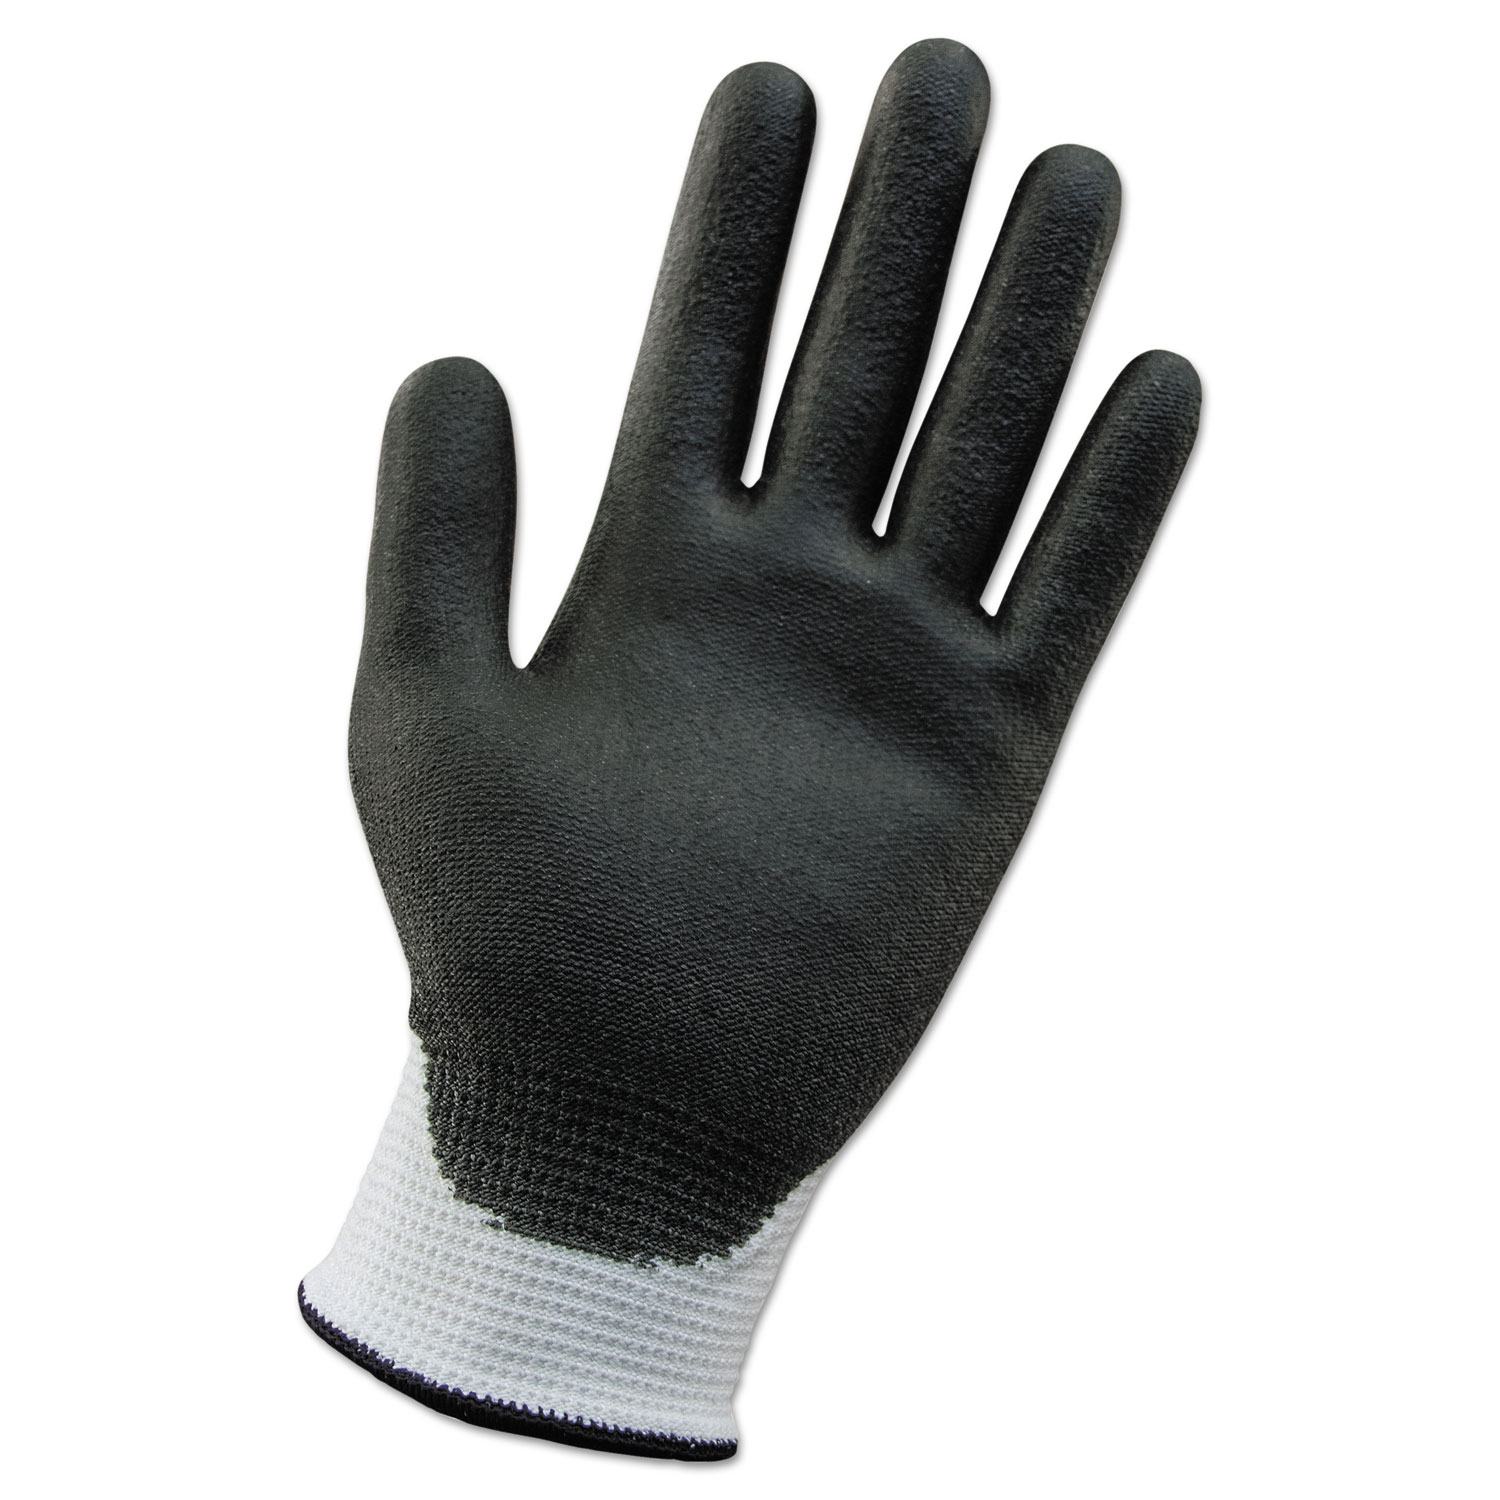 G60 ANSI Level 2 Cut-Resistant Gloves, White/Blk, 220 mm Length, Small, 12 Pairs